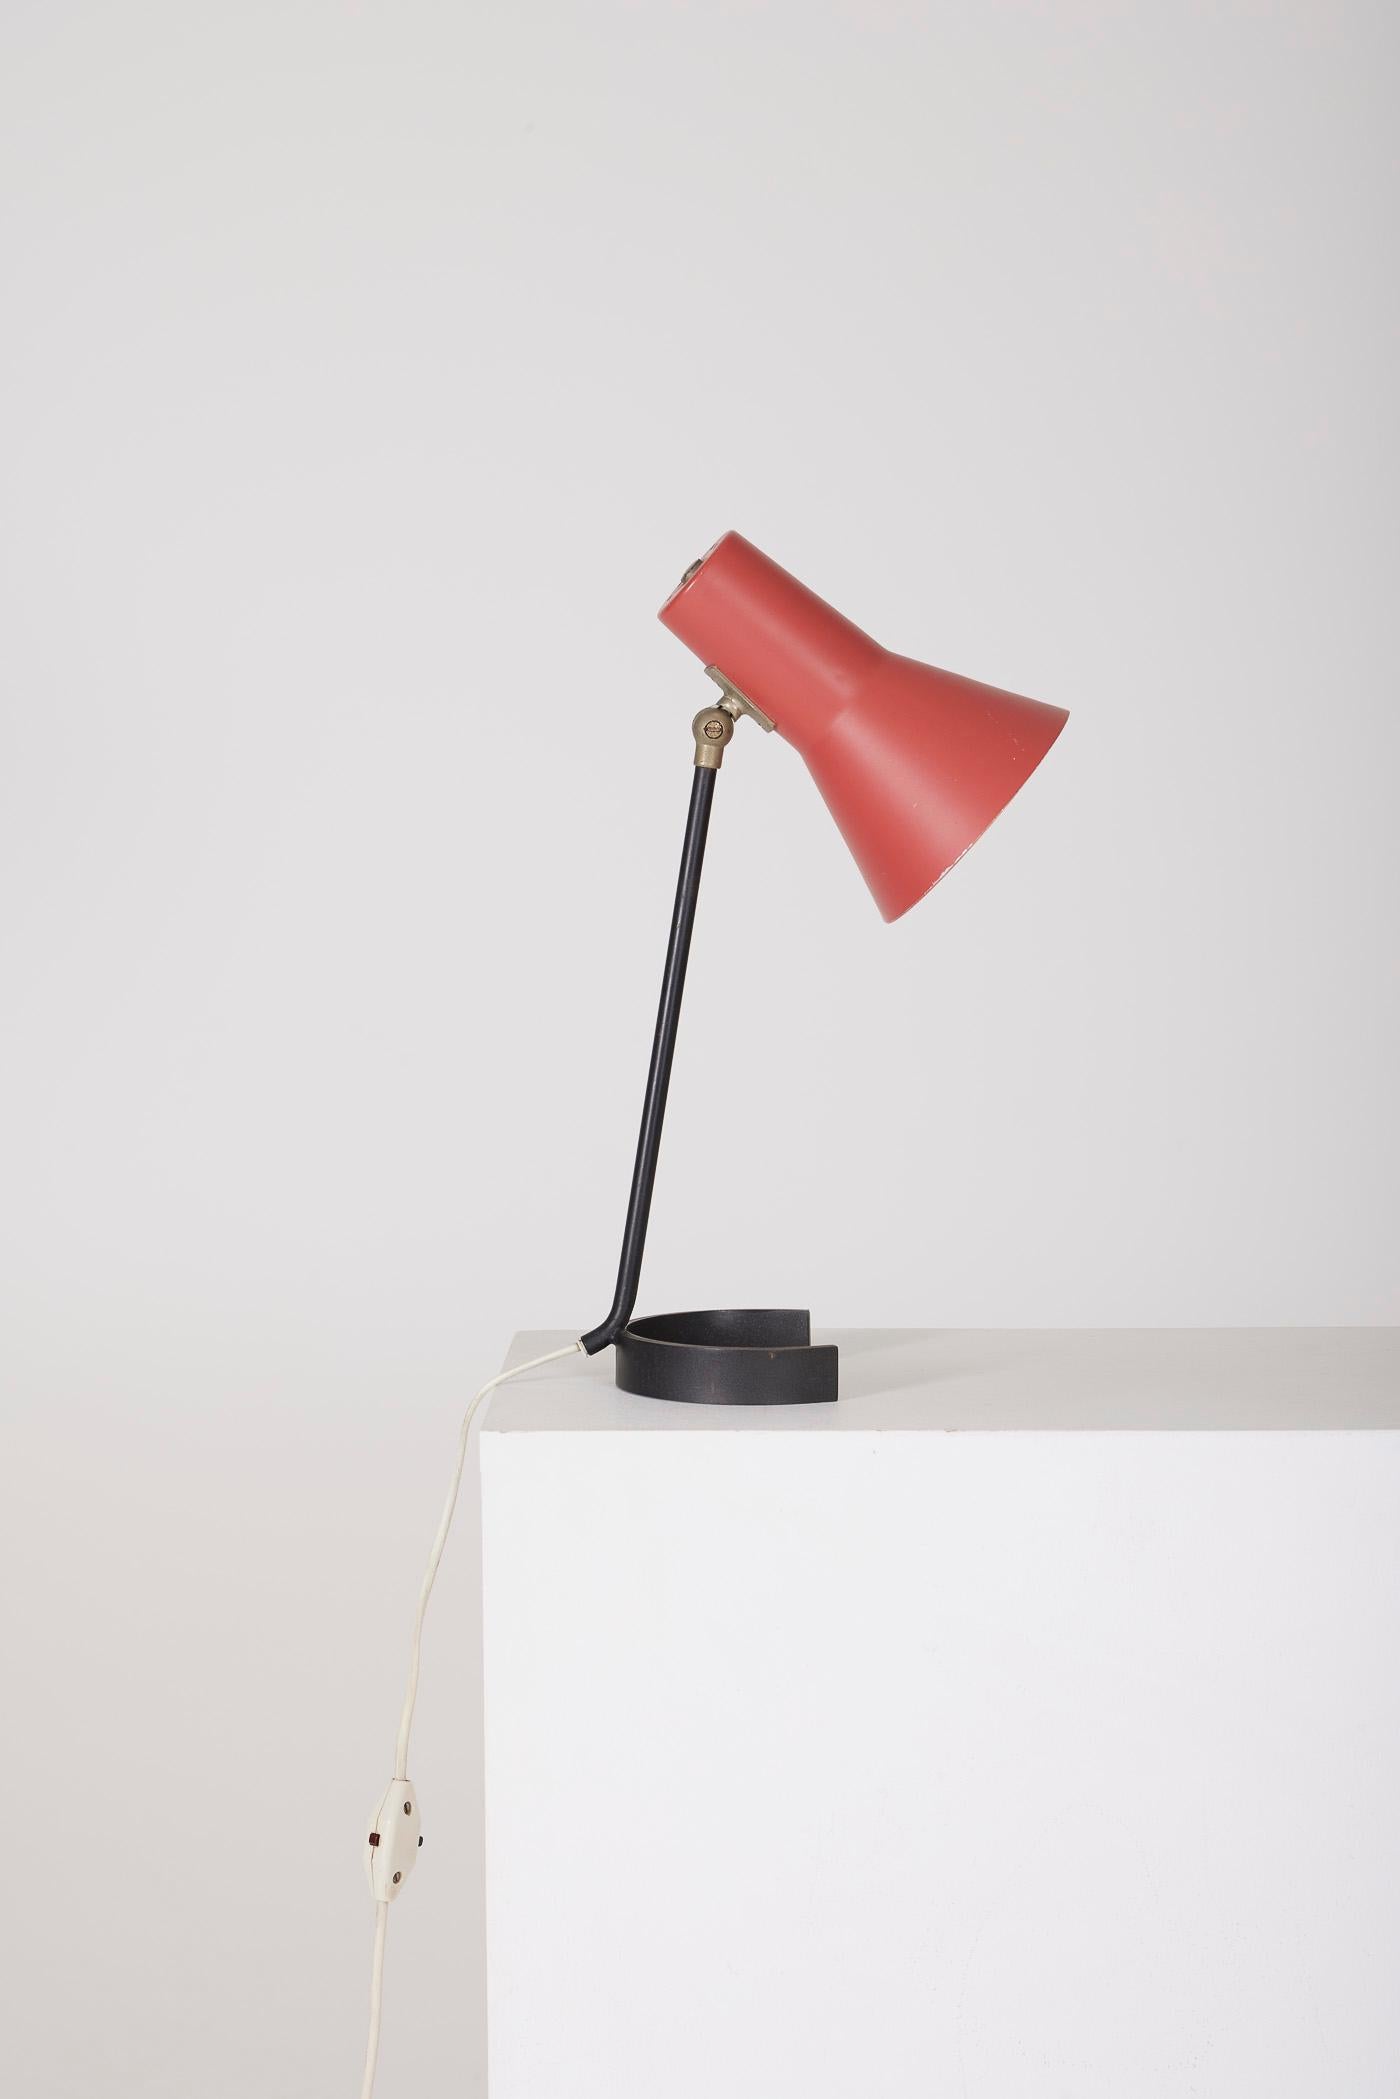 Table lamp by Dutch designer Jan Hoogervorst for Anvia, 1960s. The adjustable reflector is in red lacquered metal, resting on a blackened metal base. In very good condition.
DV455